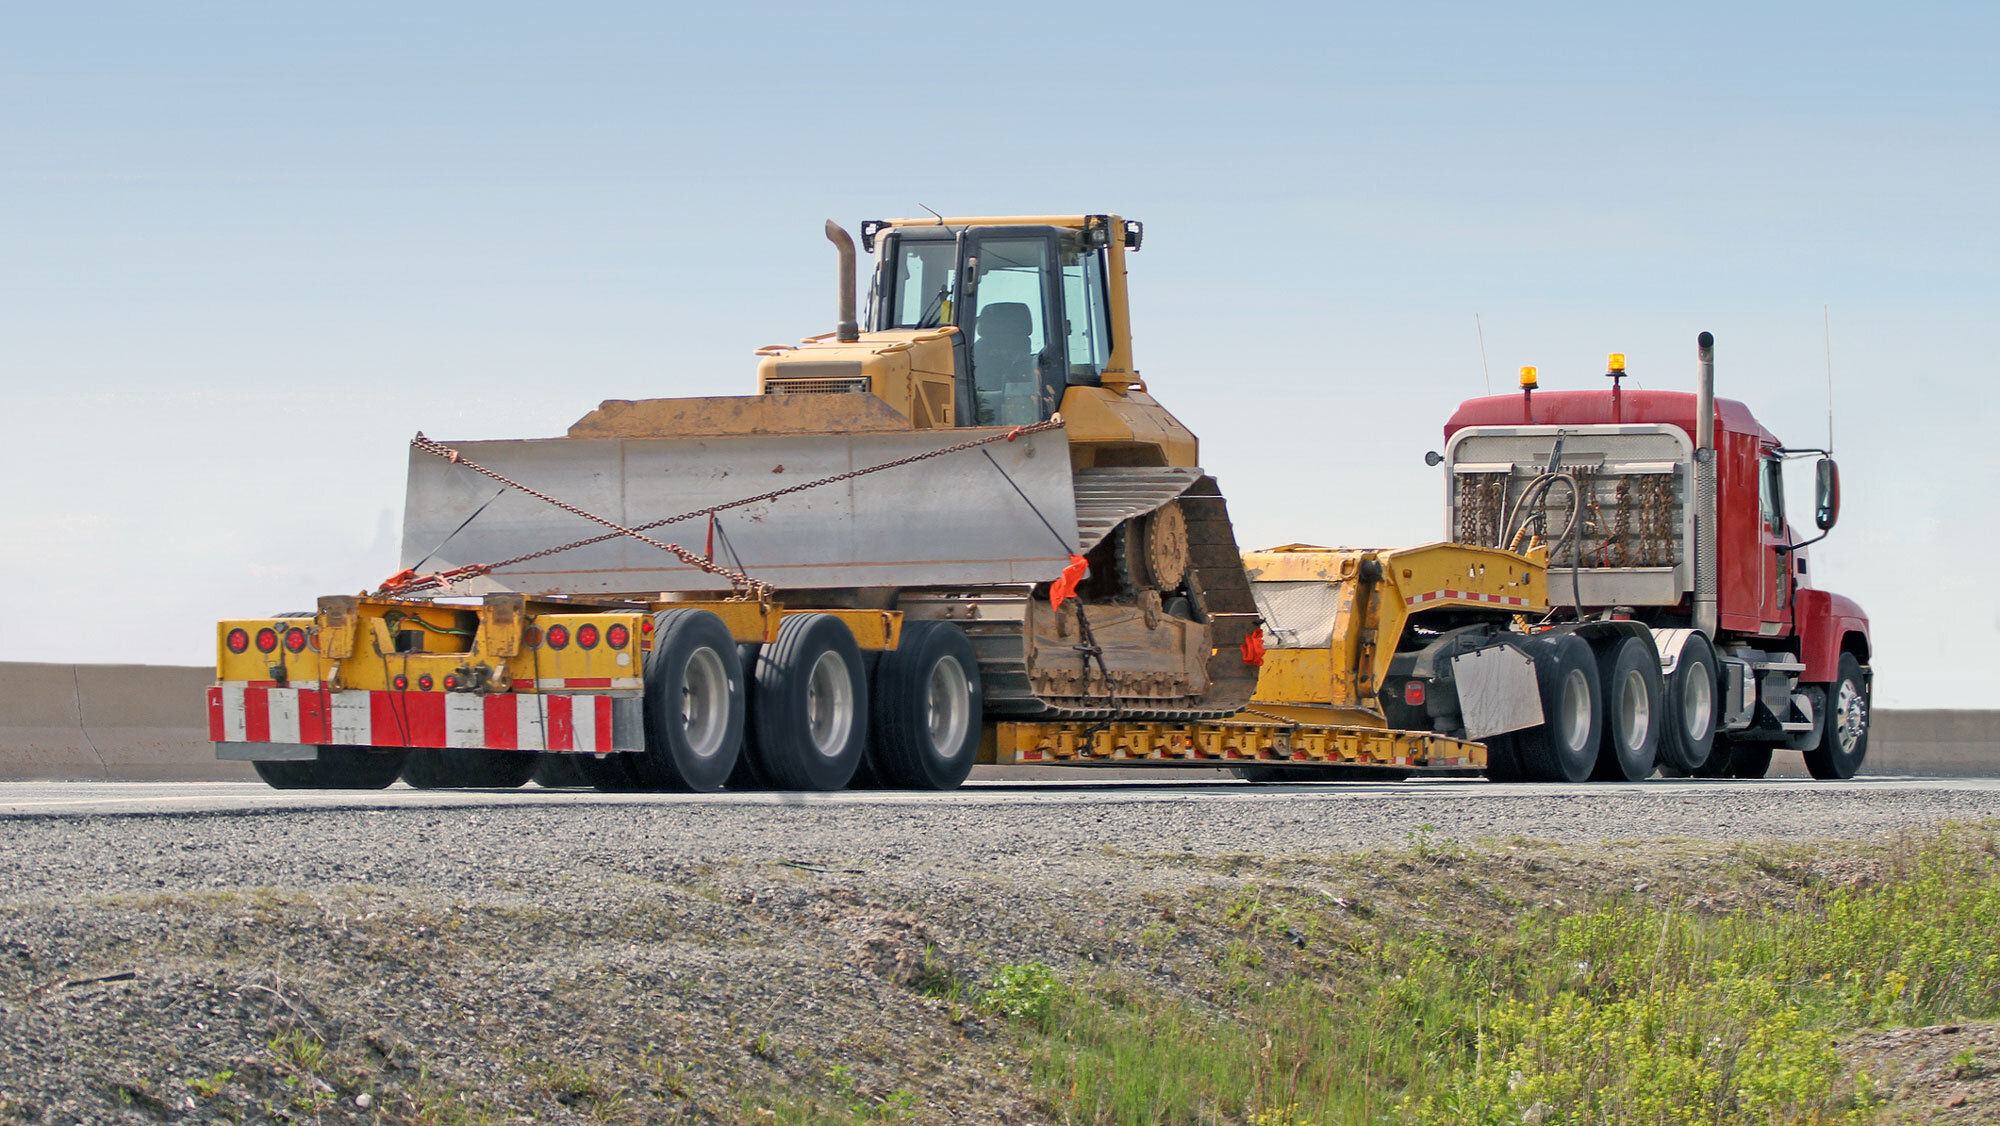 How to Ship Your Heavy Equipment